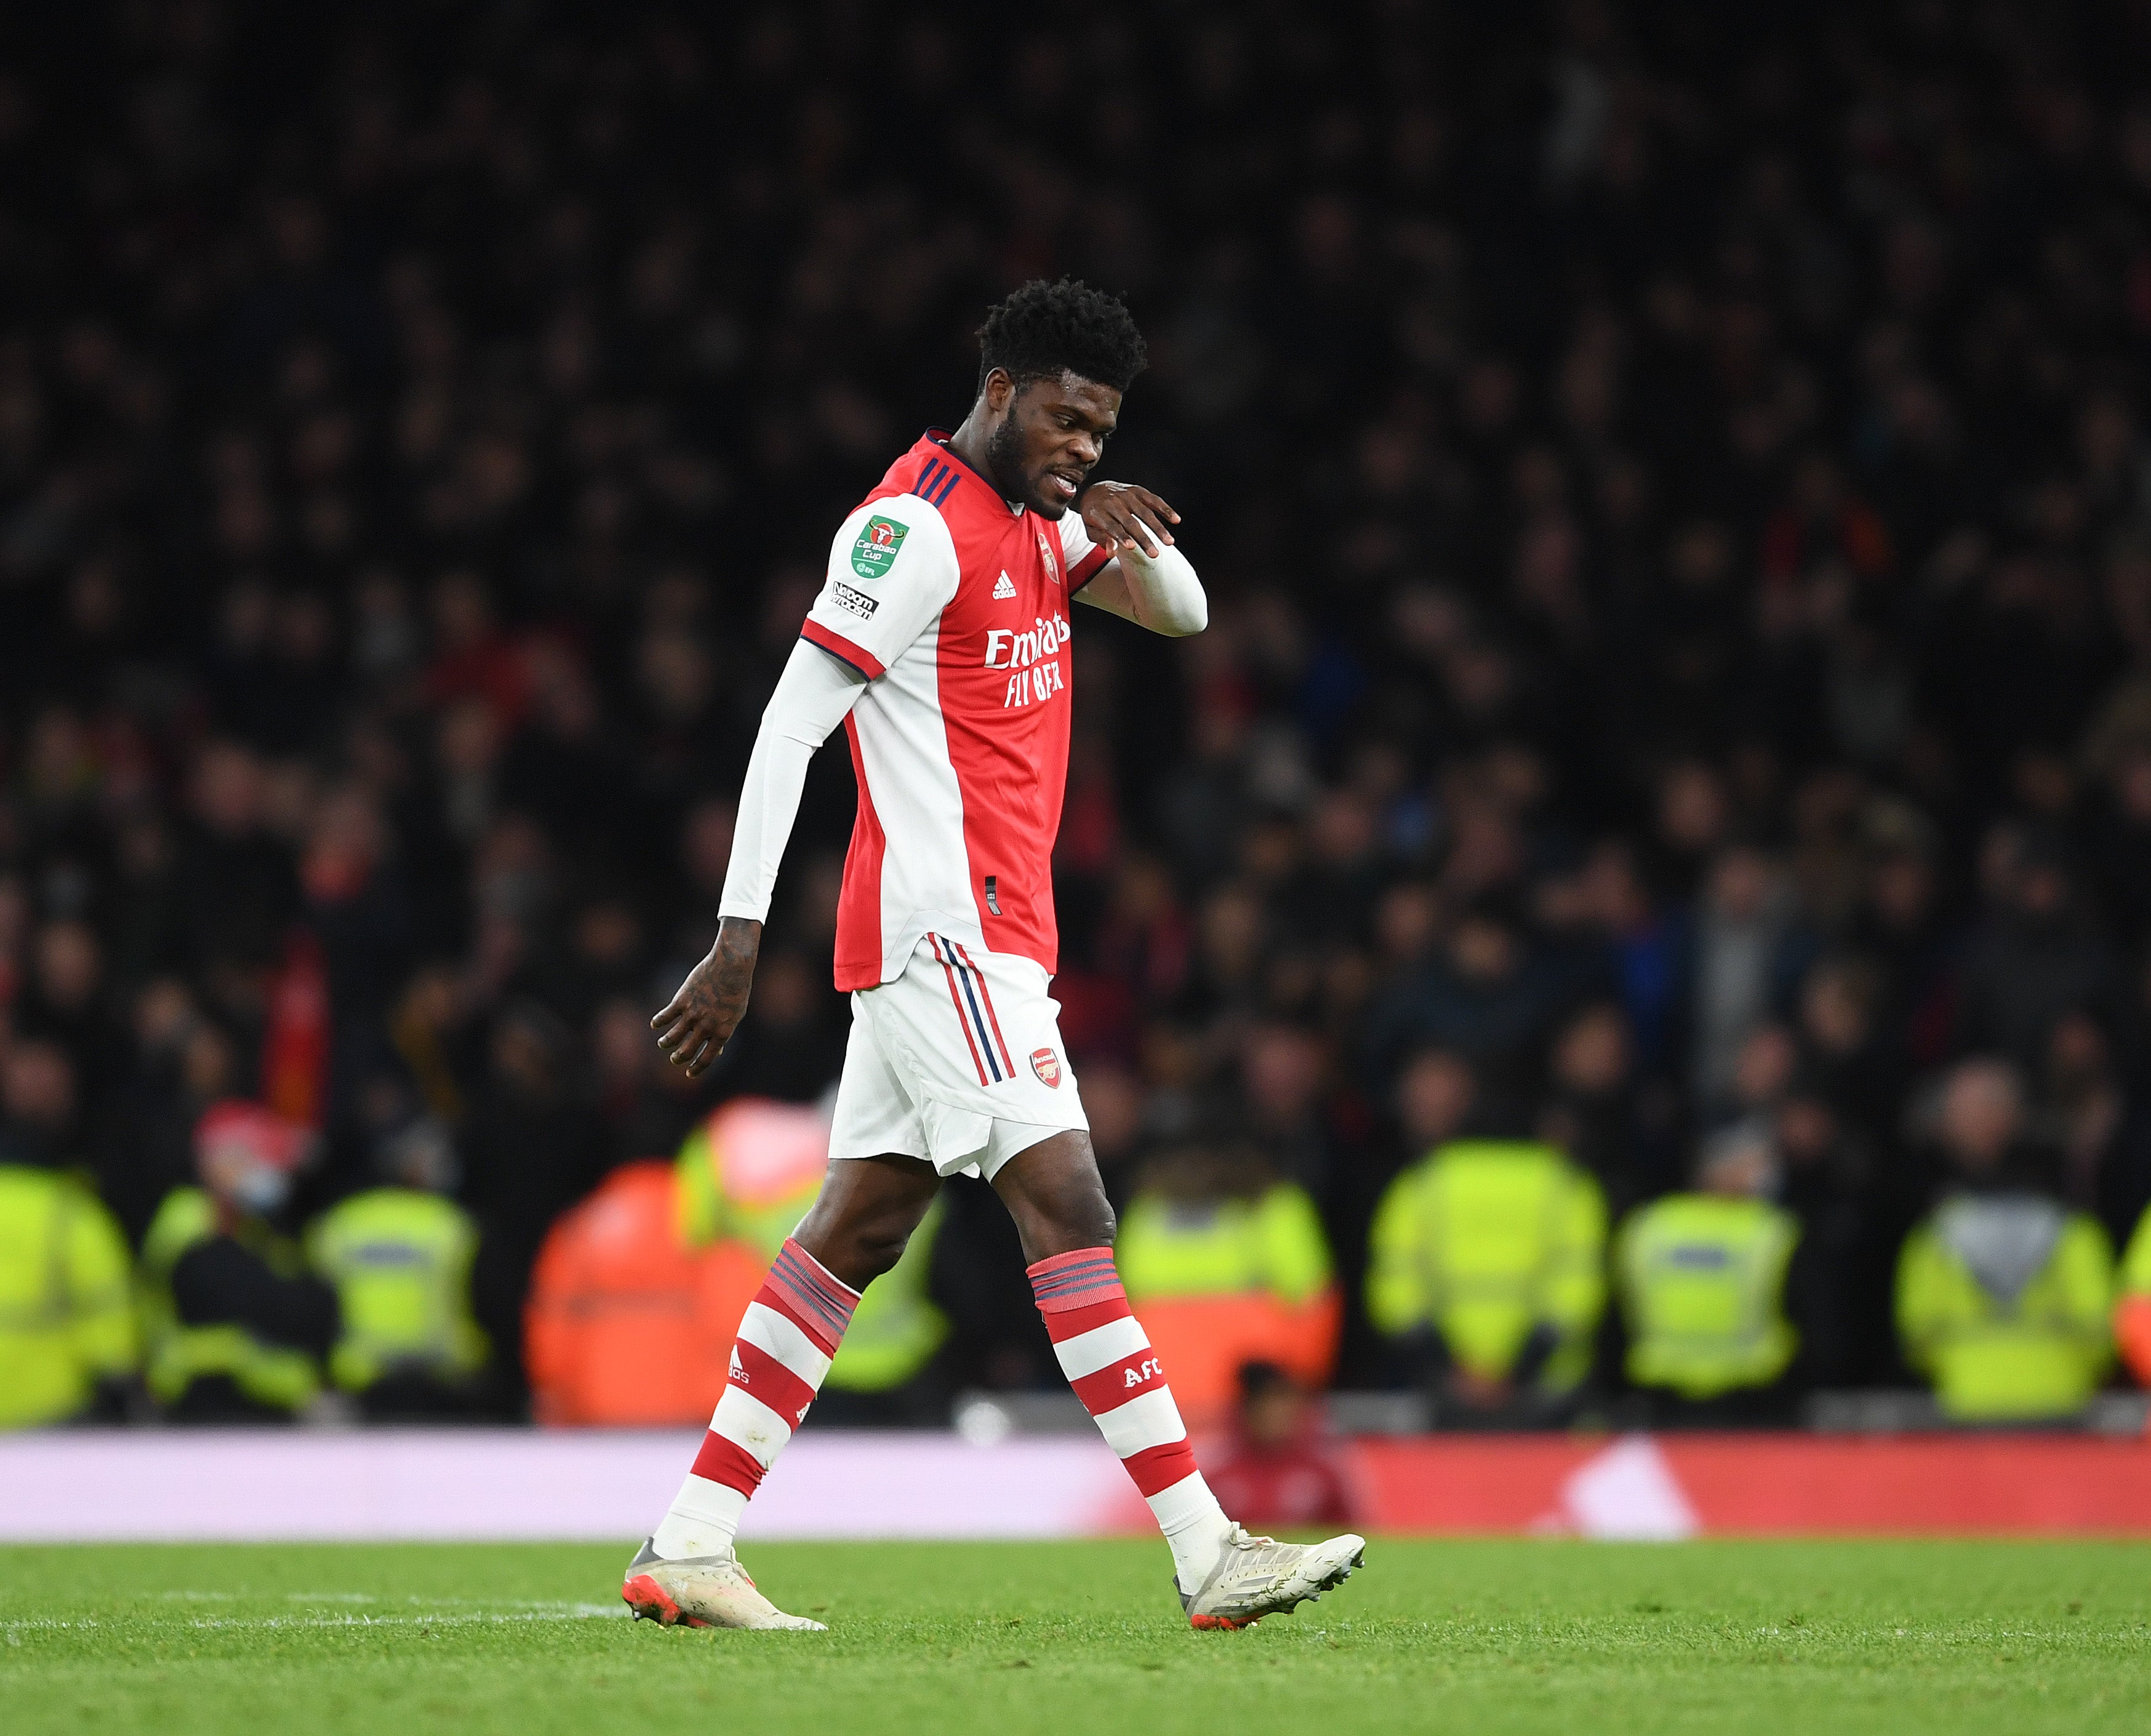 Thomas Partey was red carded in Arsenal’s clash against Liverpool